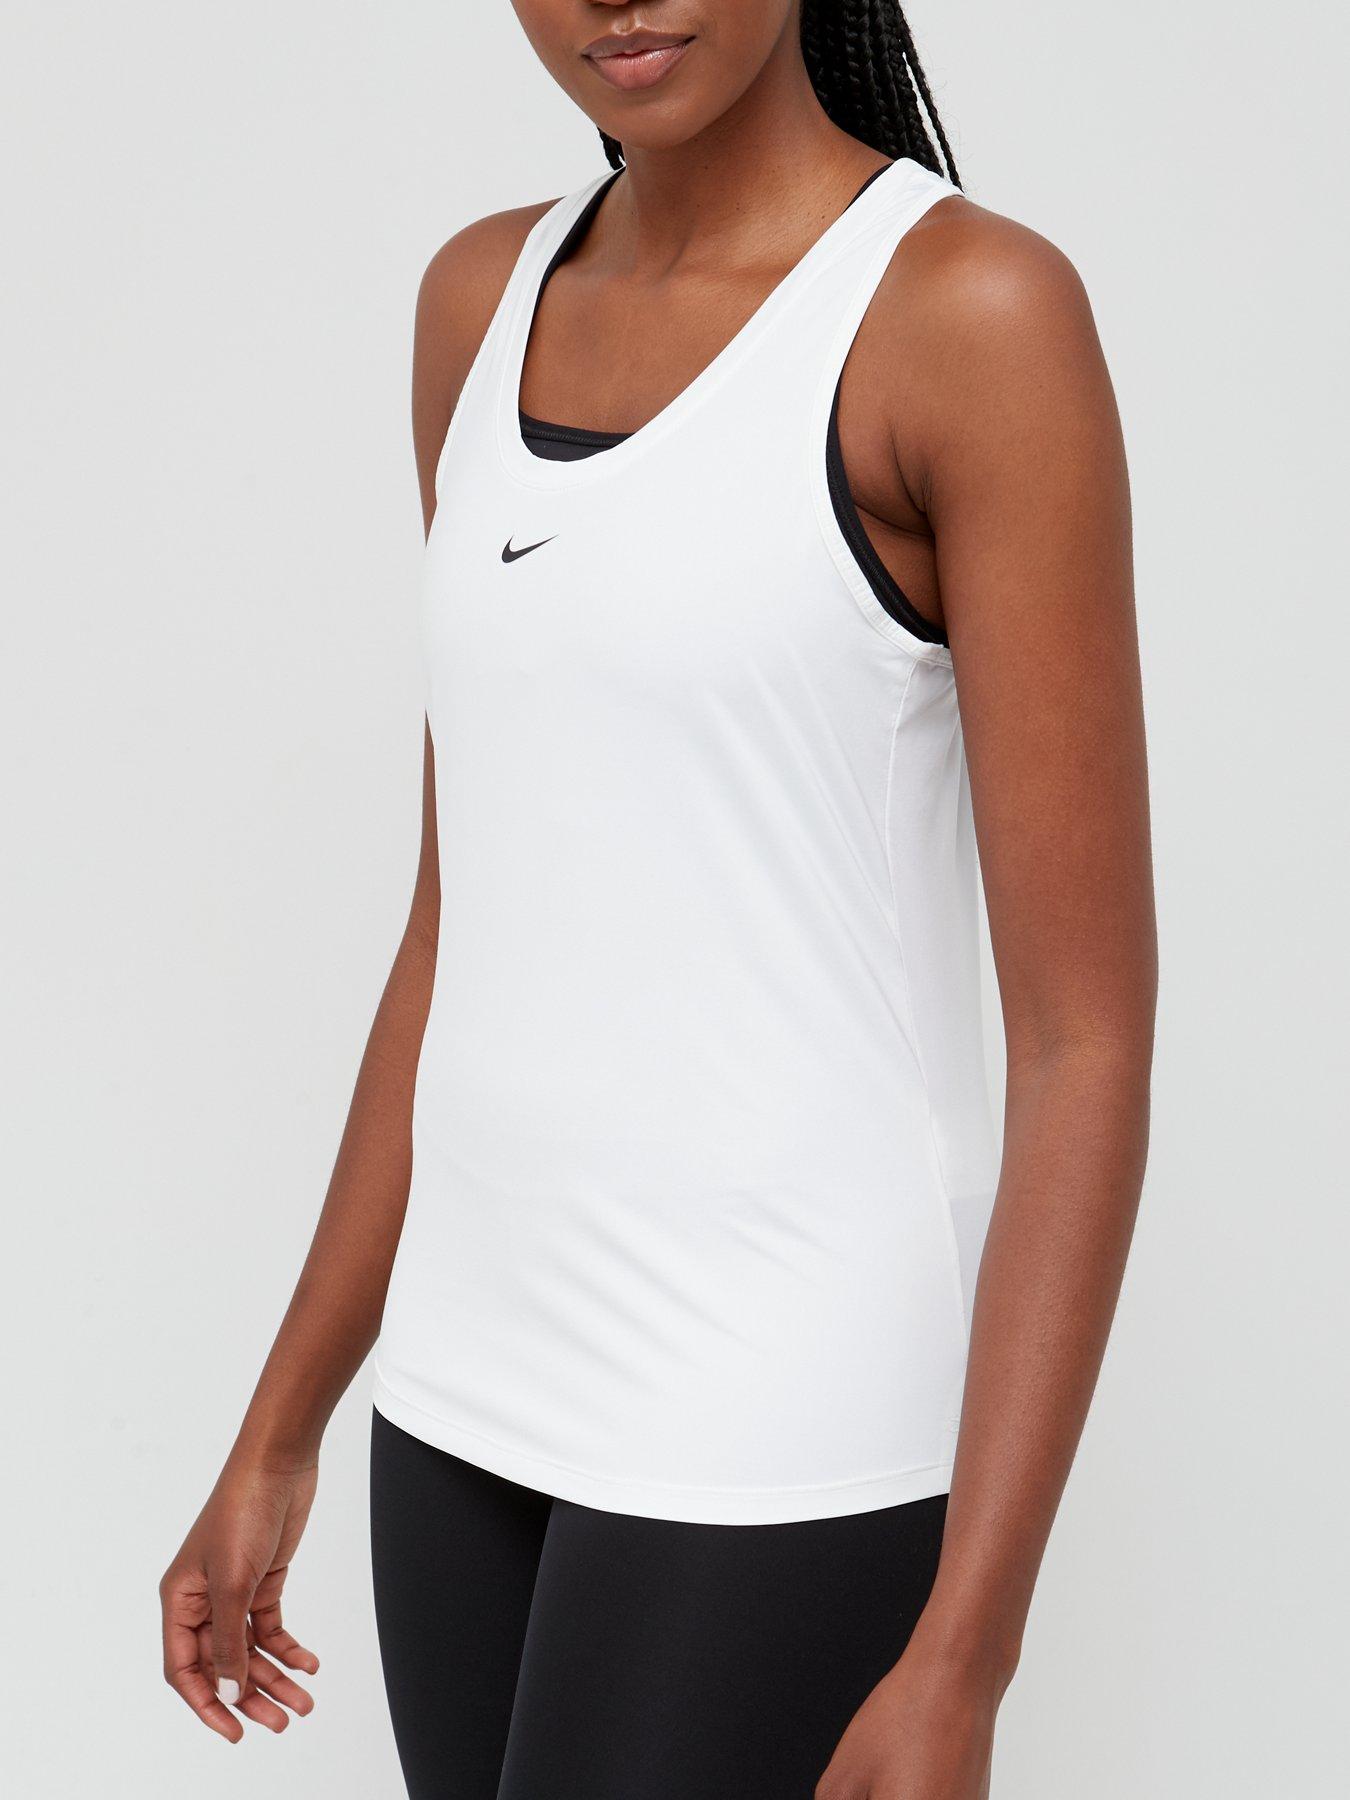 Nike Dri-Fit Tank Top Women's Small White Red Workout Running Round Neck